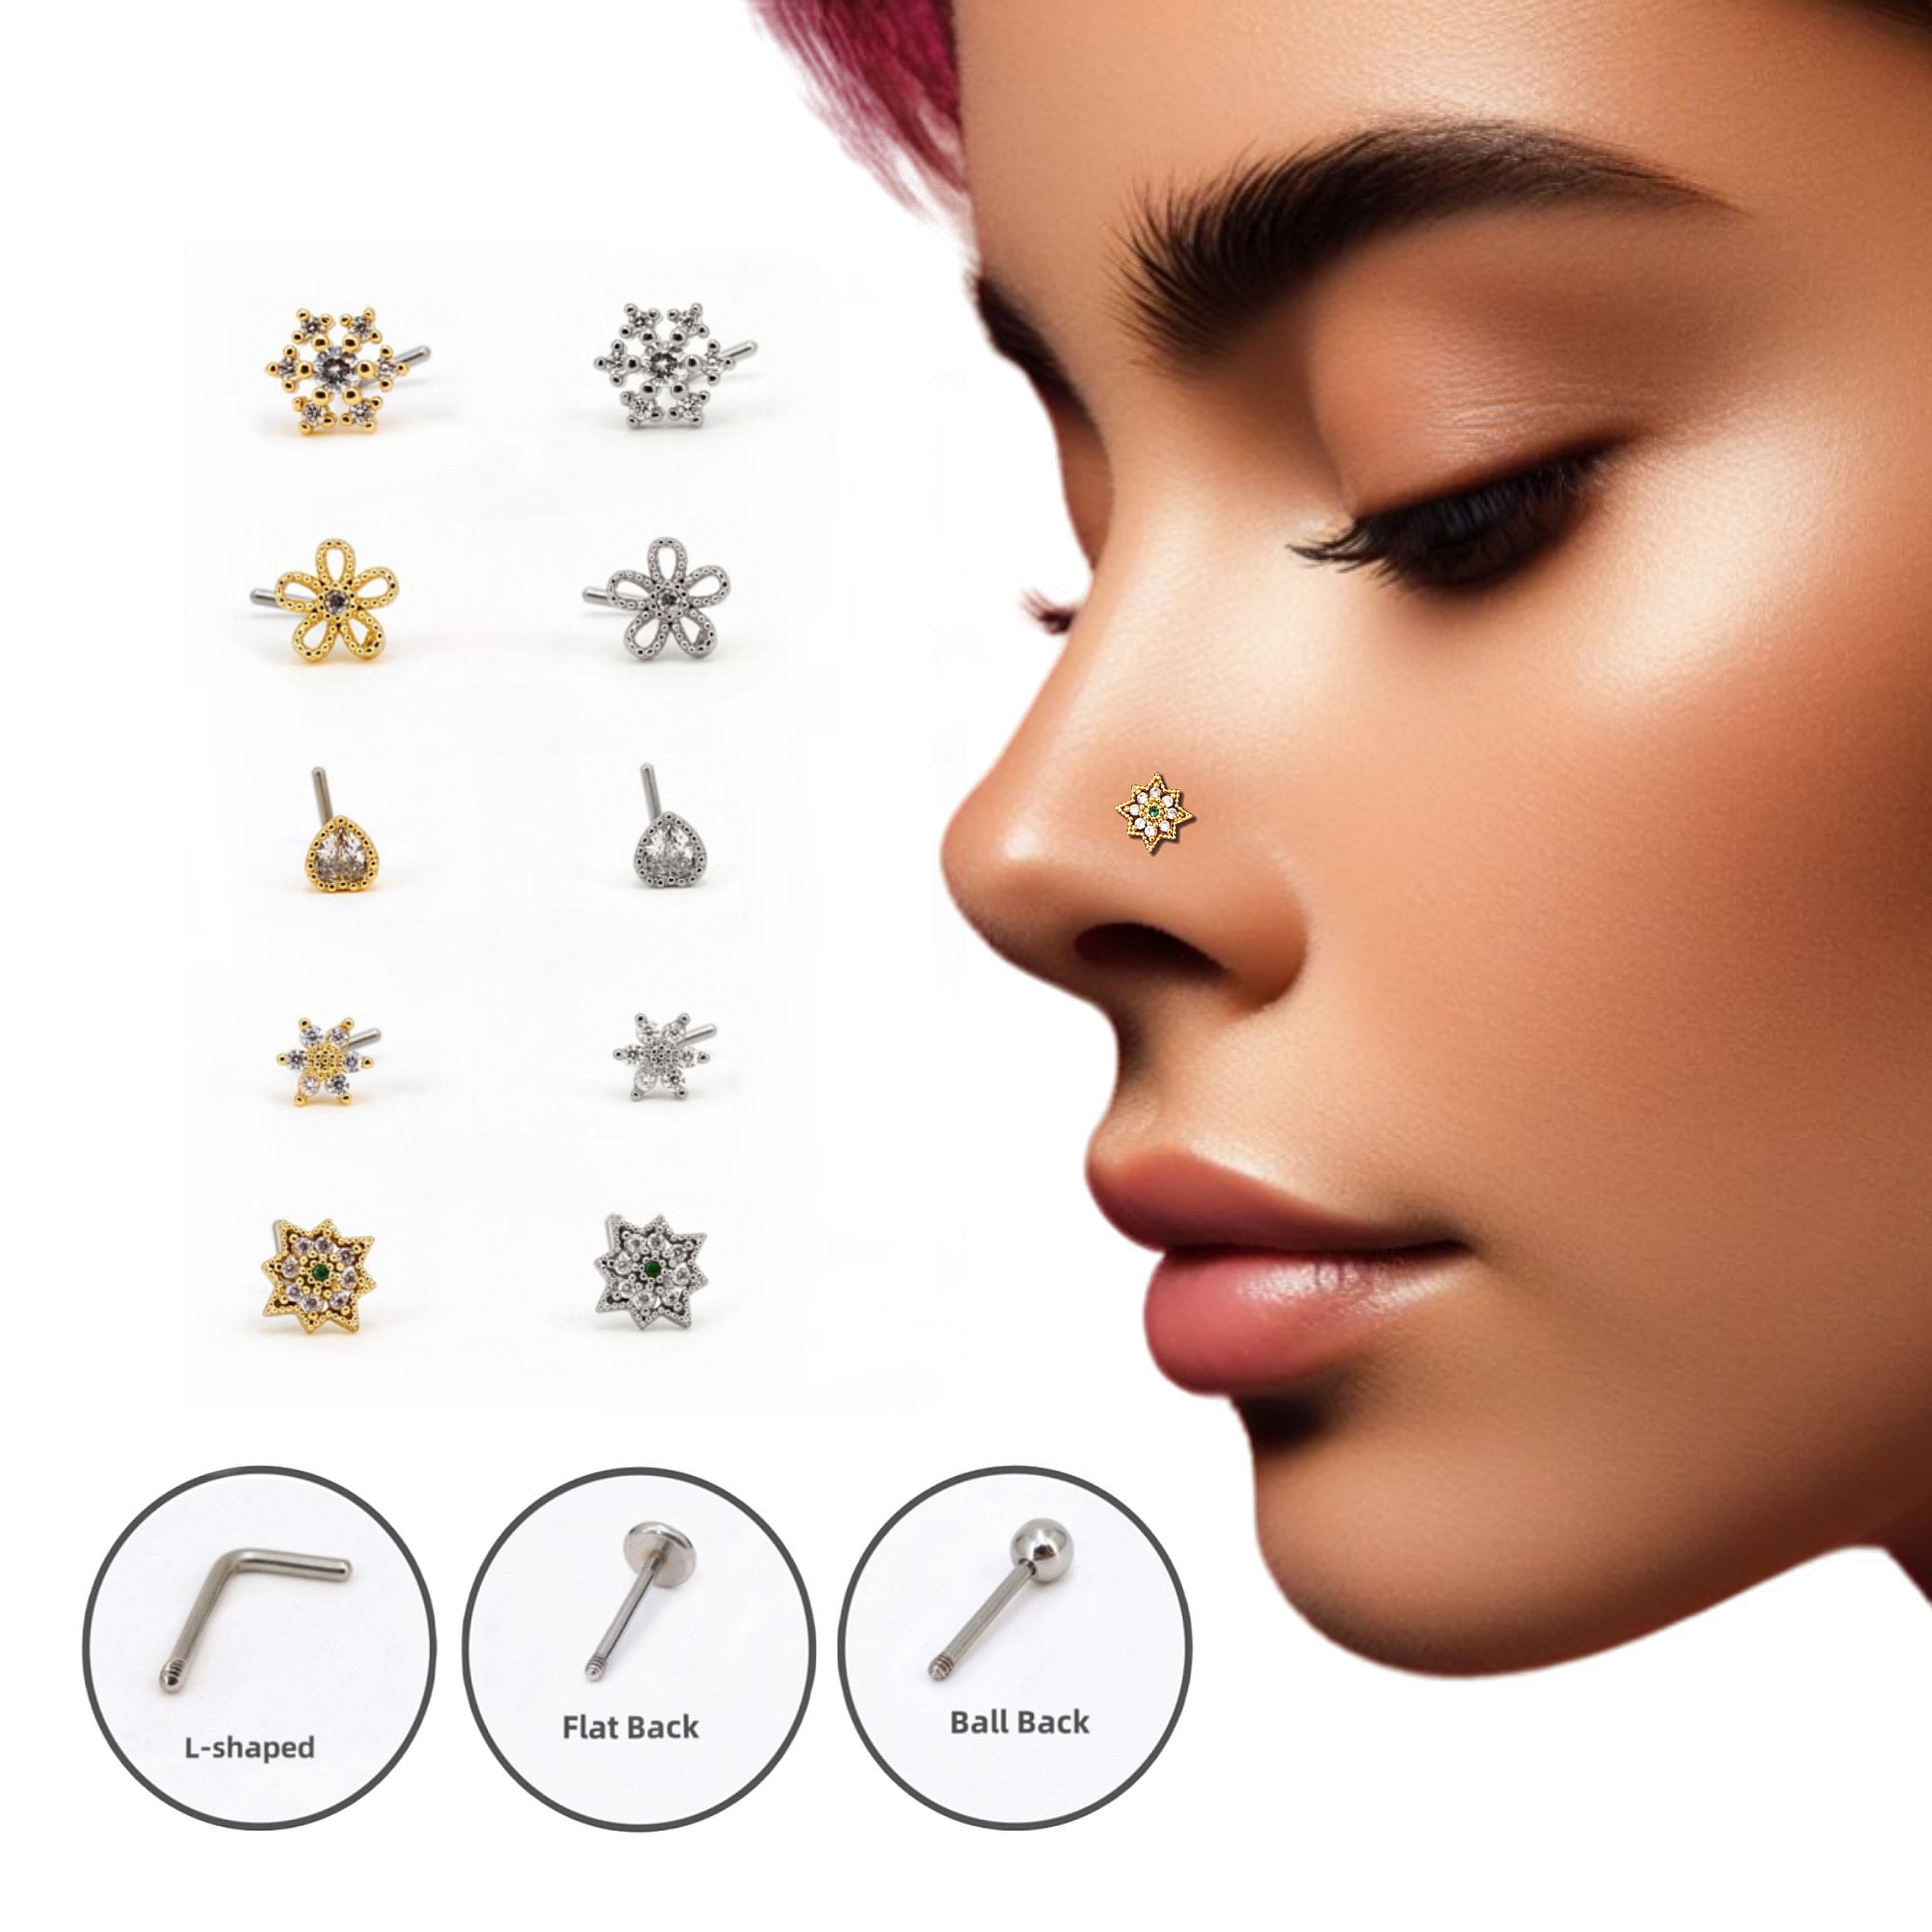 20G Surgical Steel Nose Stud “L” Shaped with Bezel-Set CZ - Silver Safari  Spokane Valley Mall